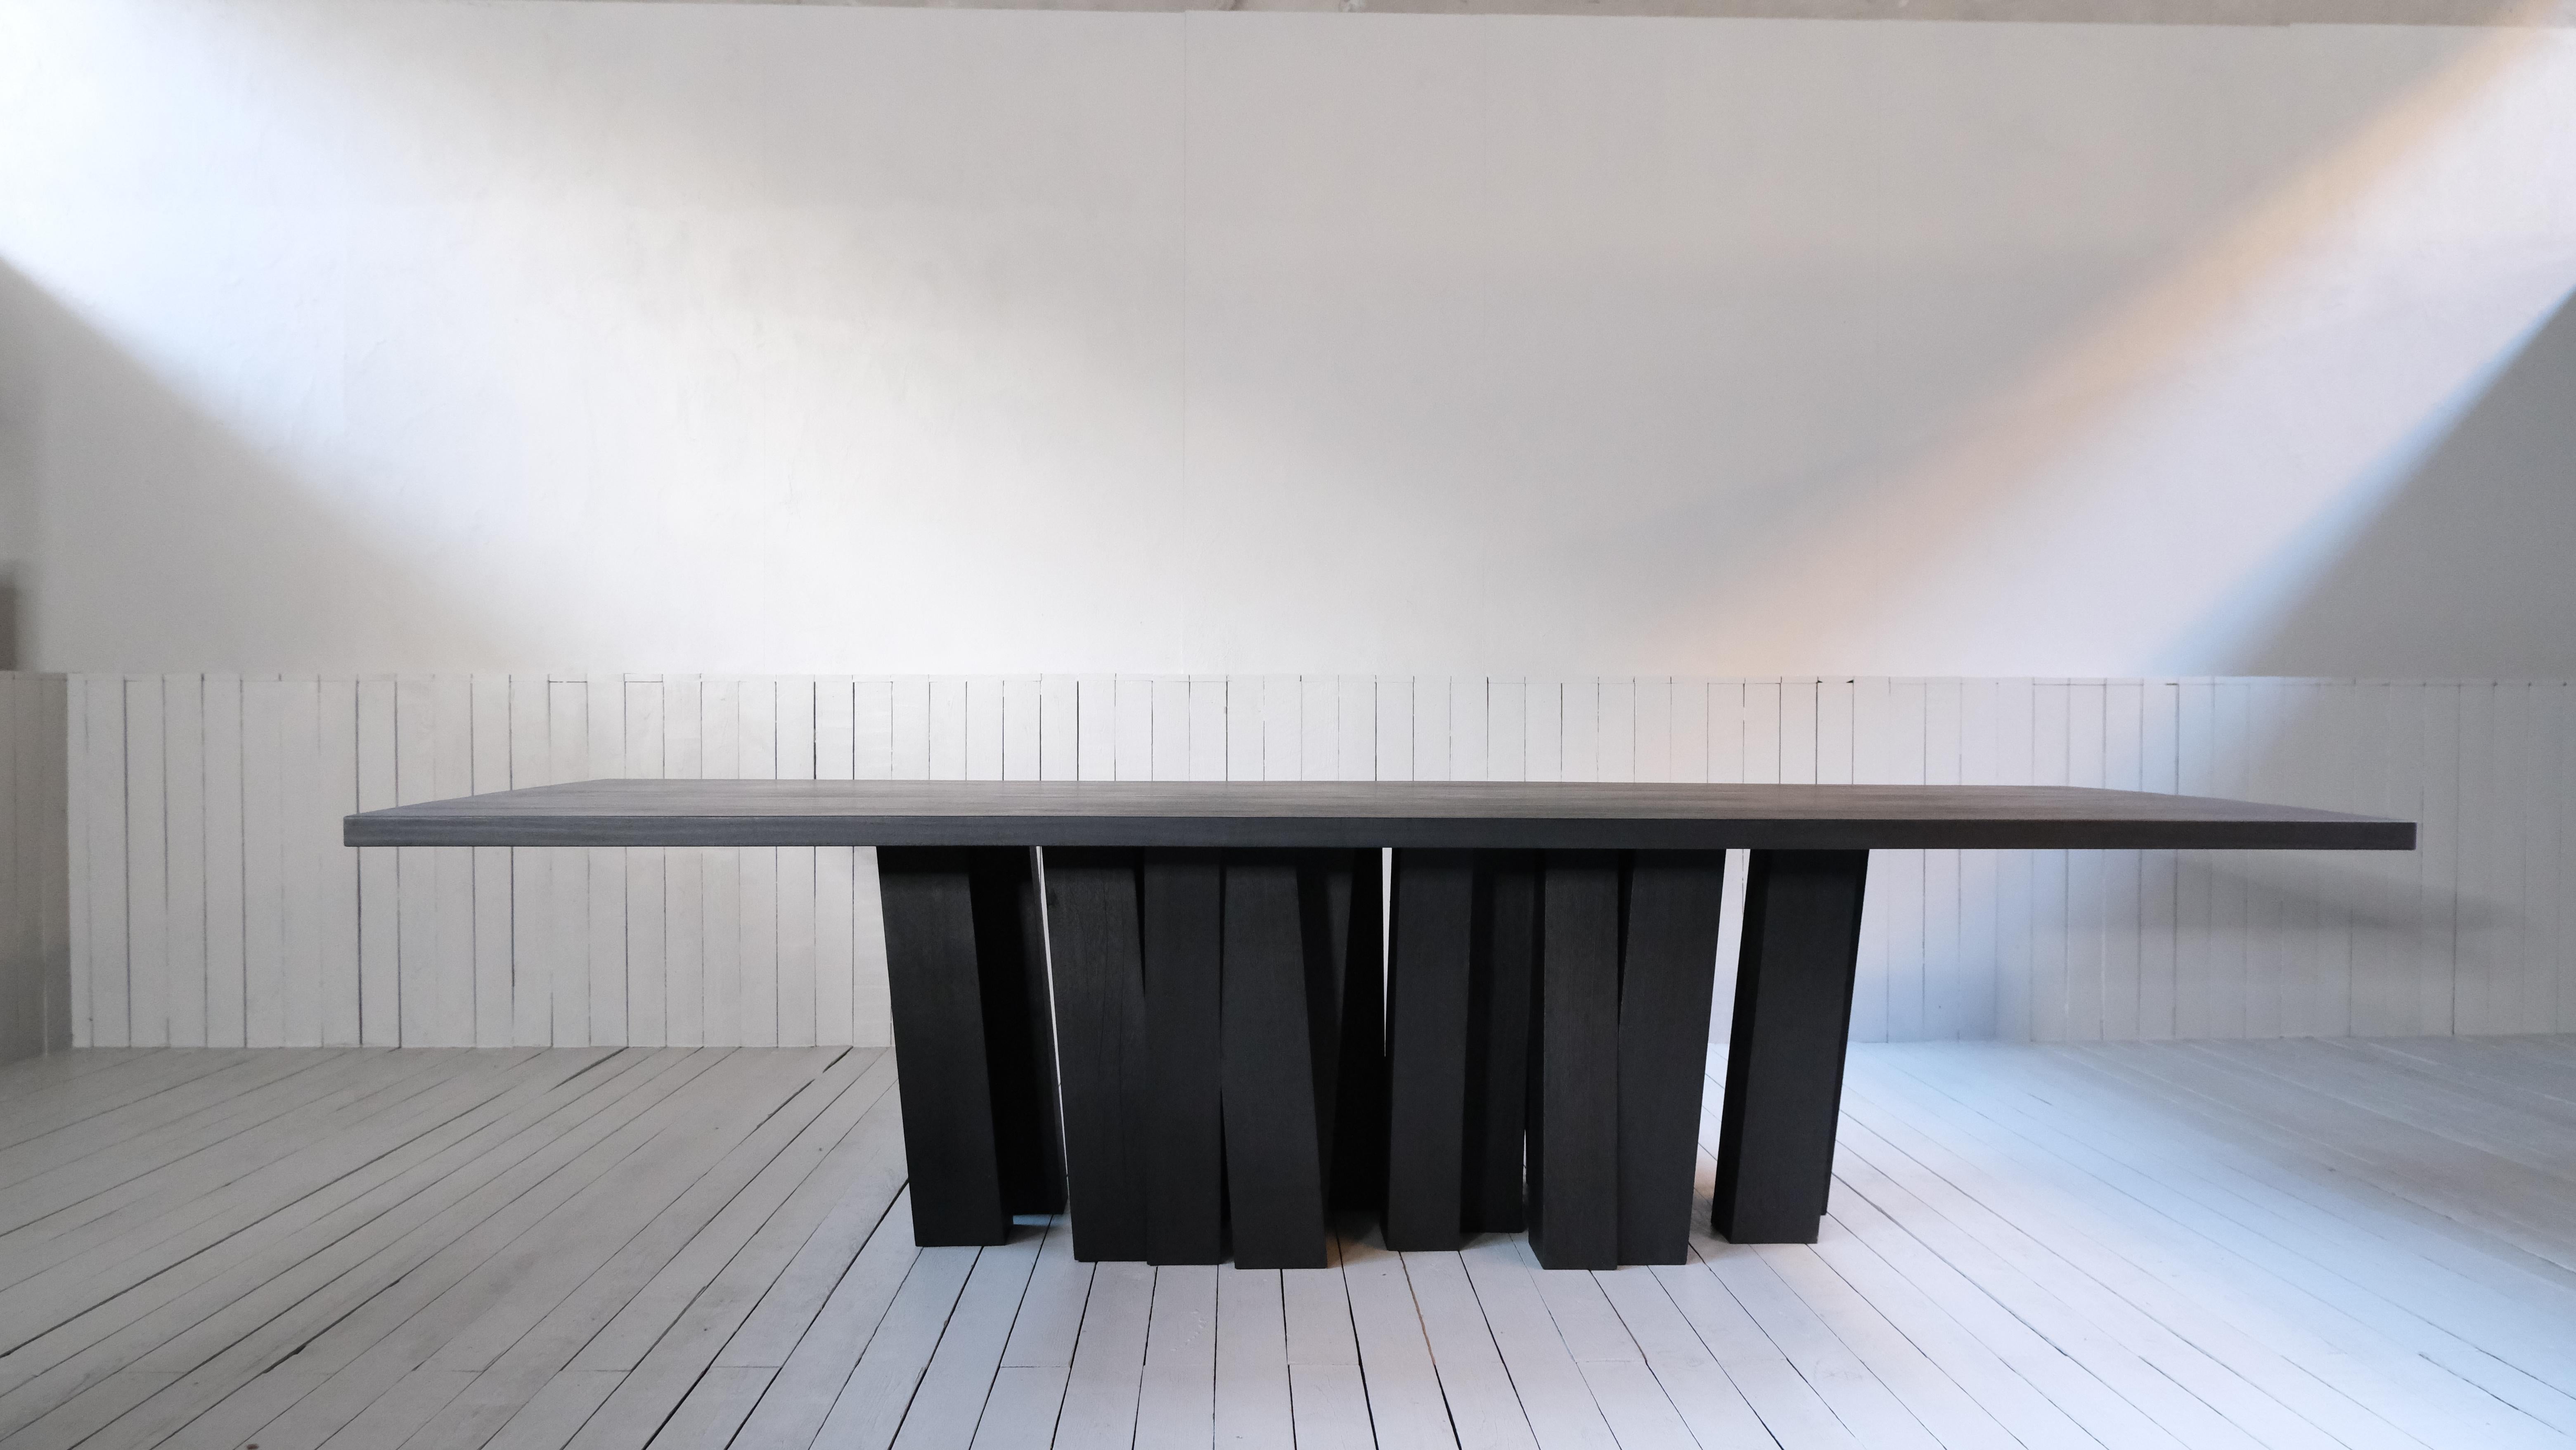 Zoumey Large Base Table by Arno Declercq
Dimensions: W 300 x L 110 x H 75 cm 
Materials: A forest of table legs made out of 25 solid pieces of Iroko Wood.
Table top made out of African walnut, burned and waxed. 
>>A dining table for 8 - 12